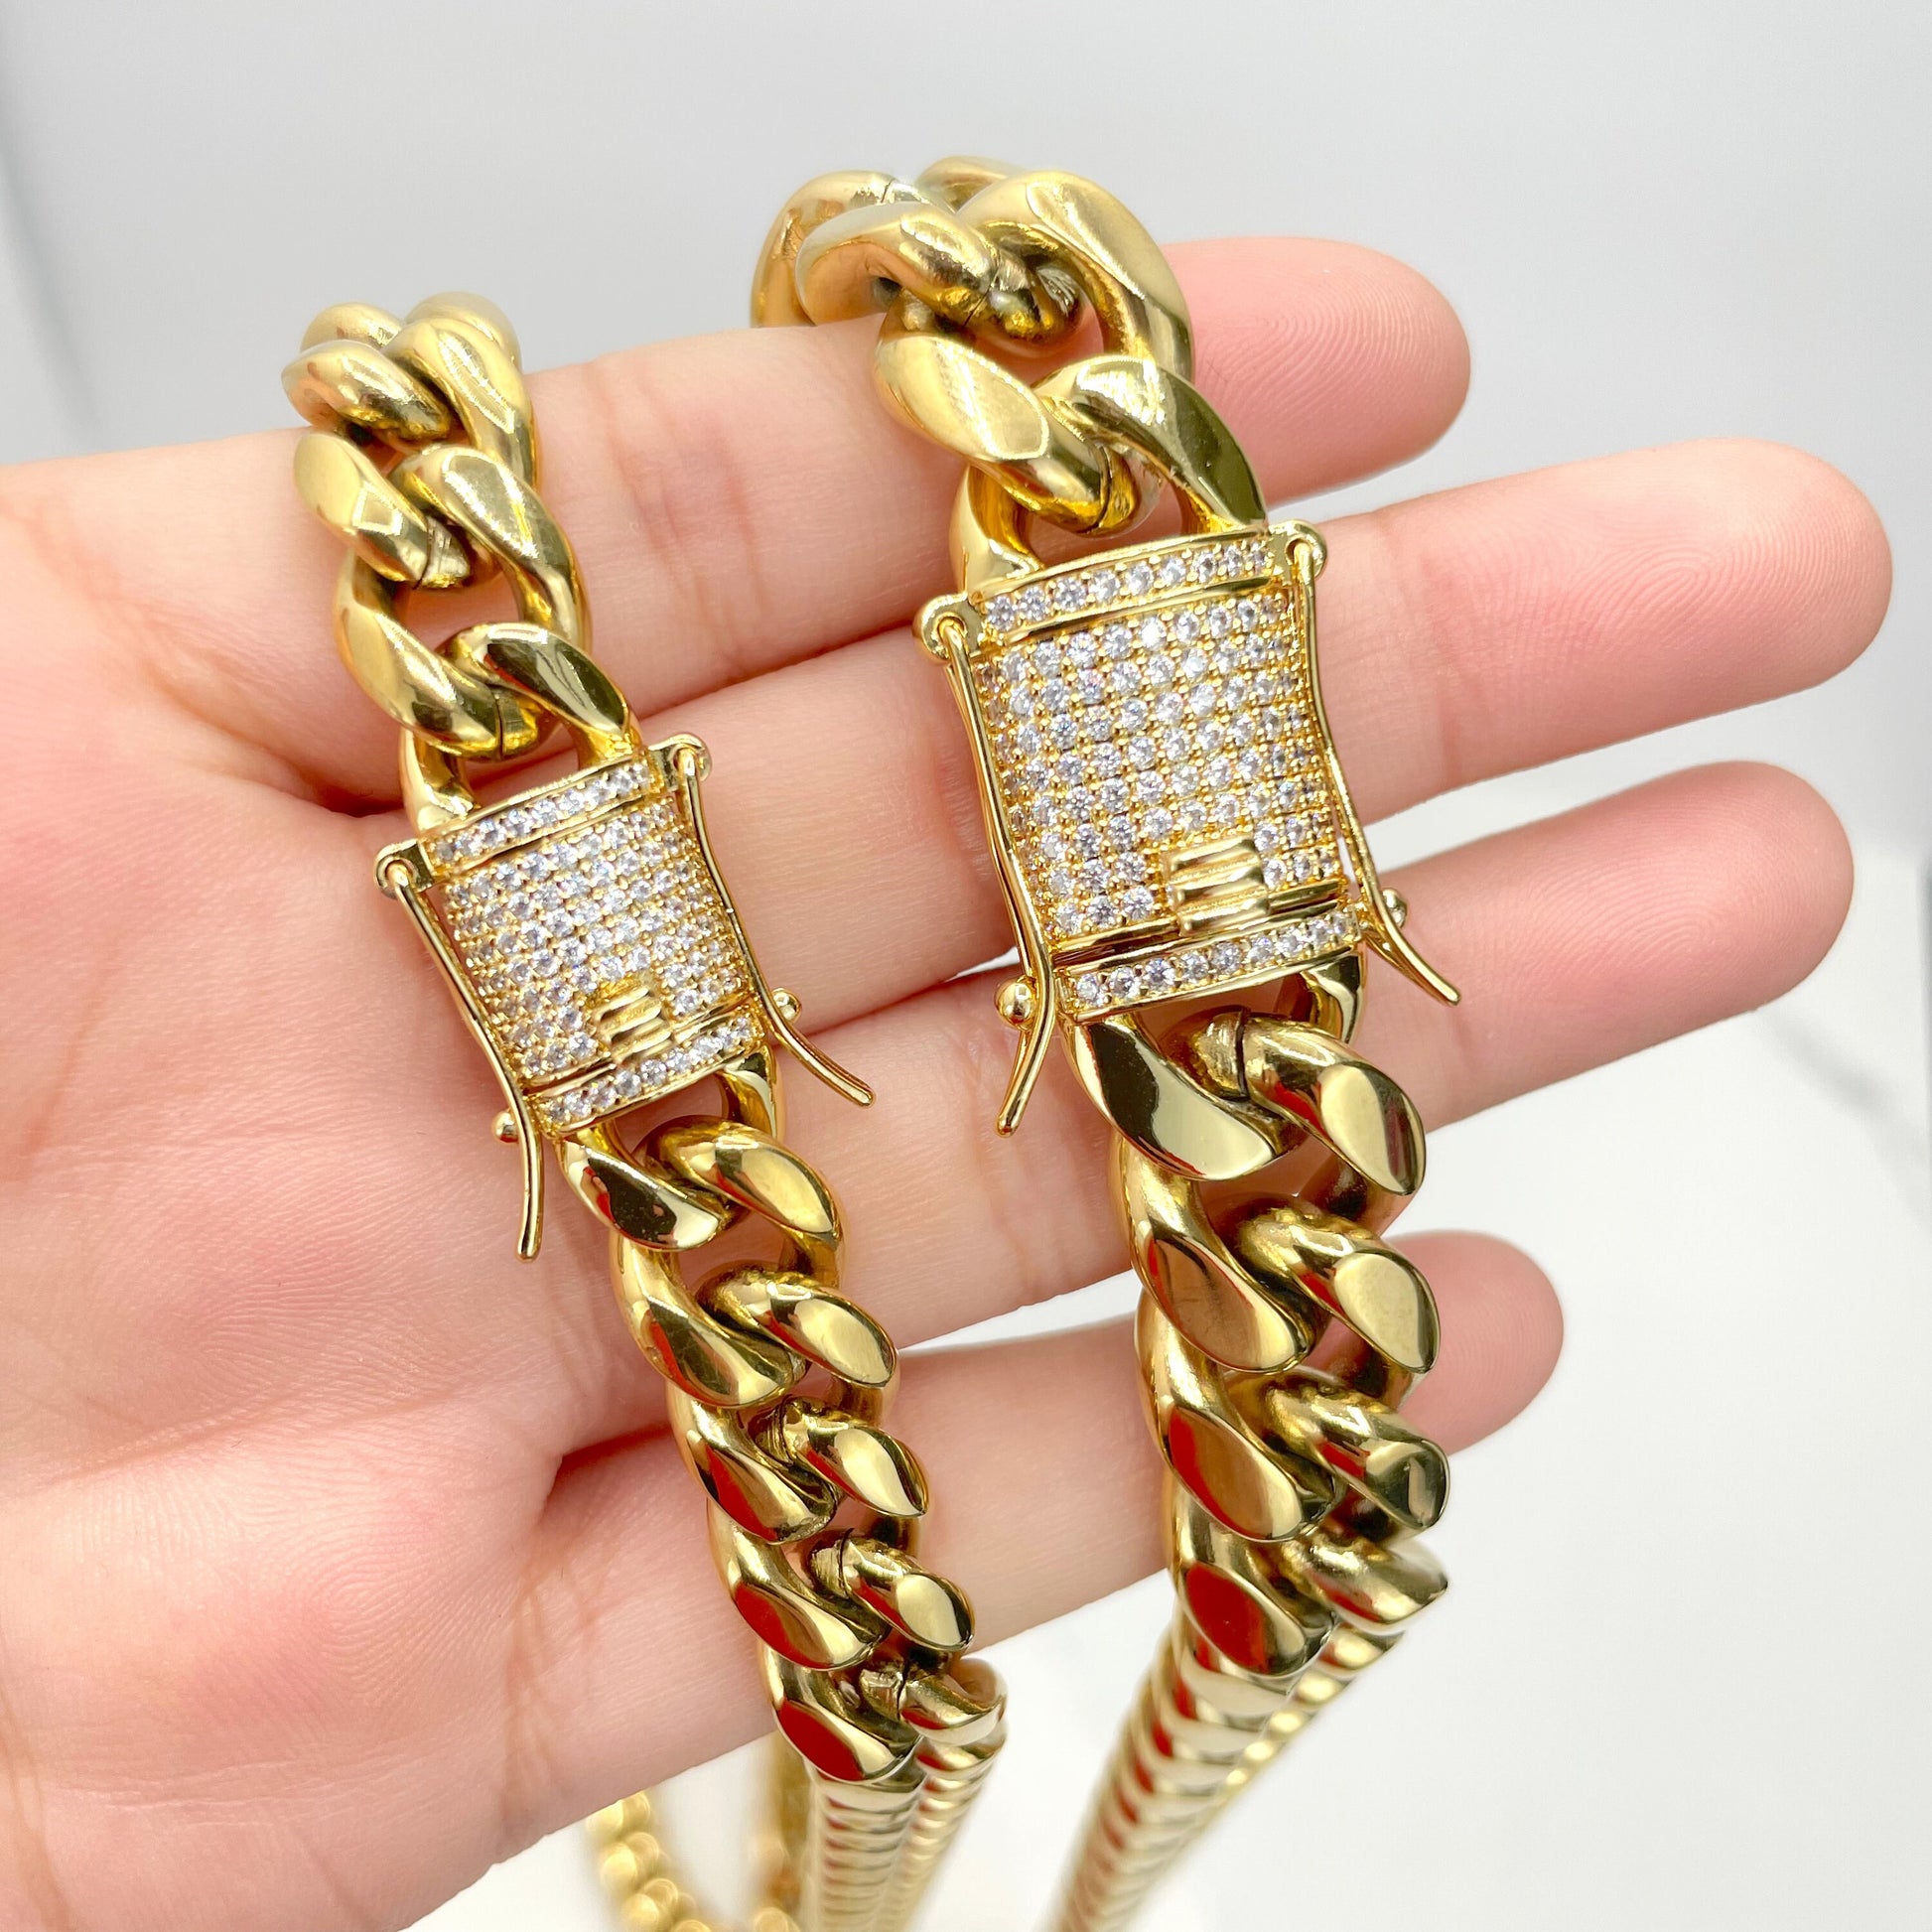 14k Gold Filled Miami Cuban Link 14mm or 10mm Unisex Chain Featuring Micro Pave Cubic Zirconia Double Safe Box Lock Clasp, Wholesale Jewelry